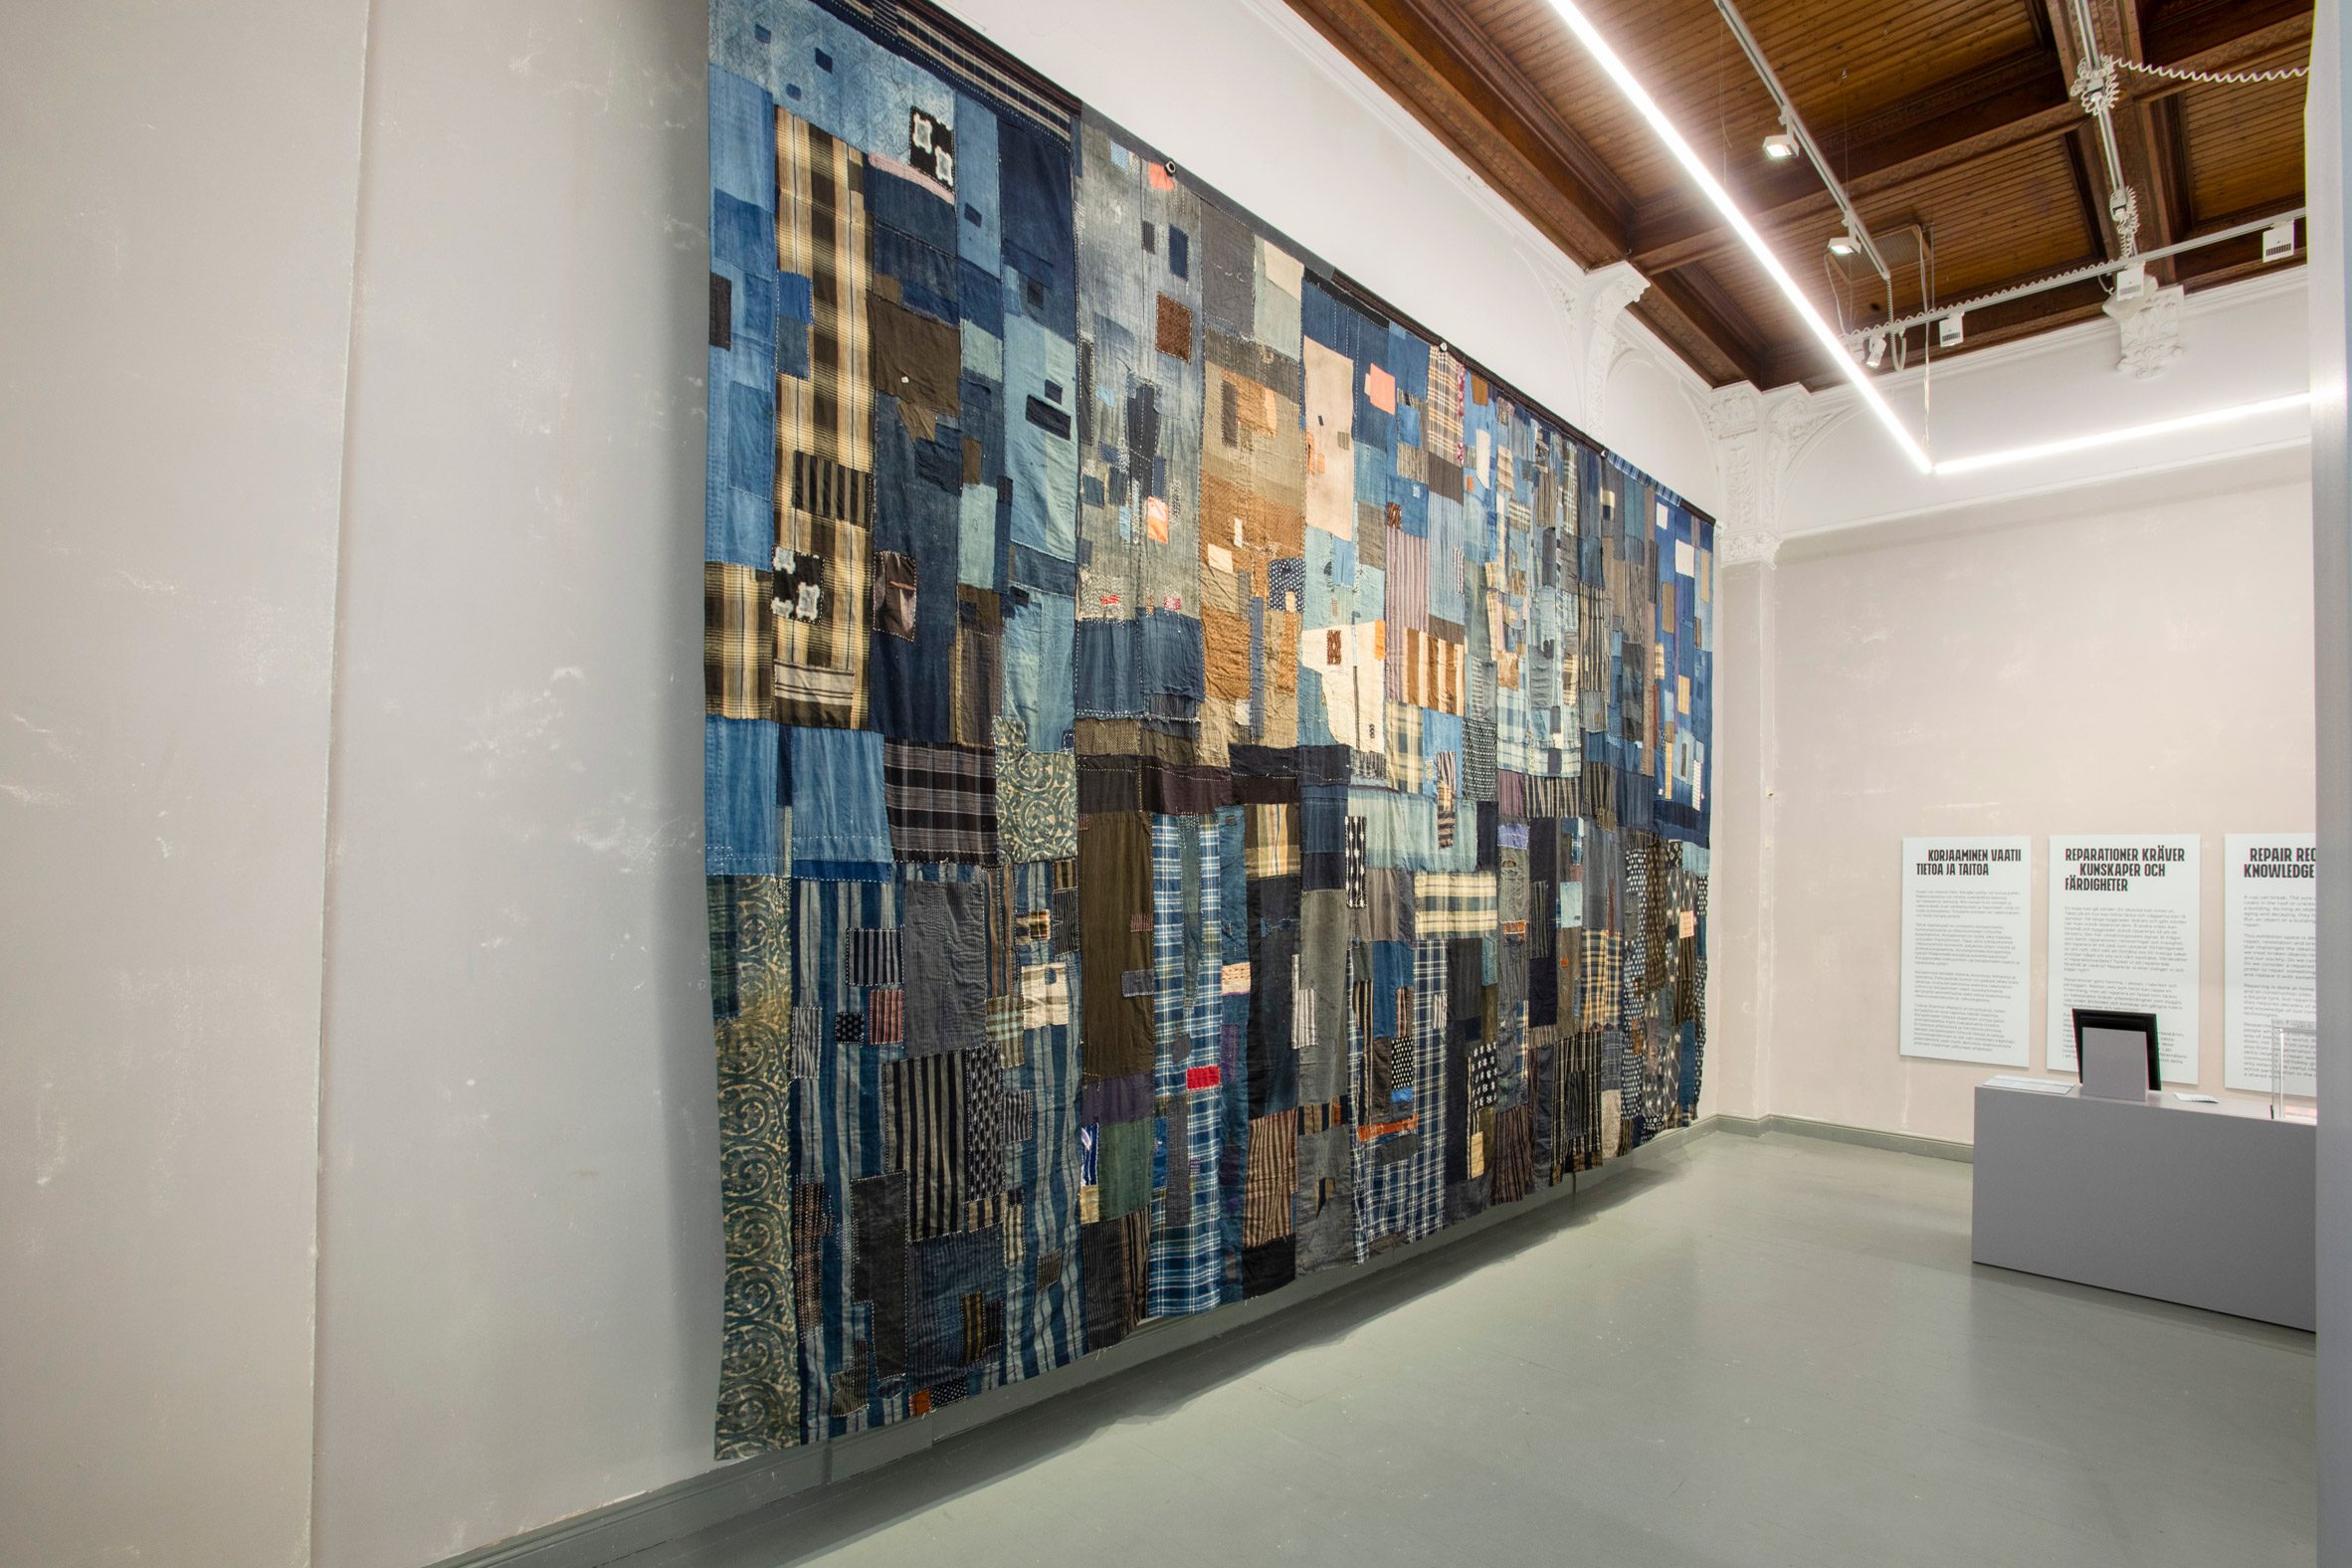 Photo of Takao Momiyama's textile work Inheritance, hanging on the wall of a museum